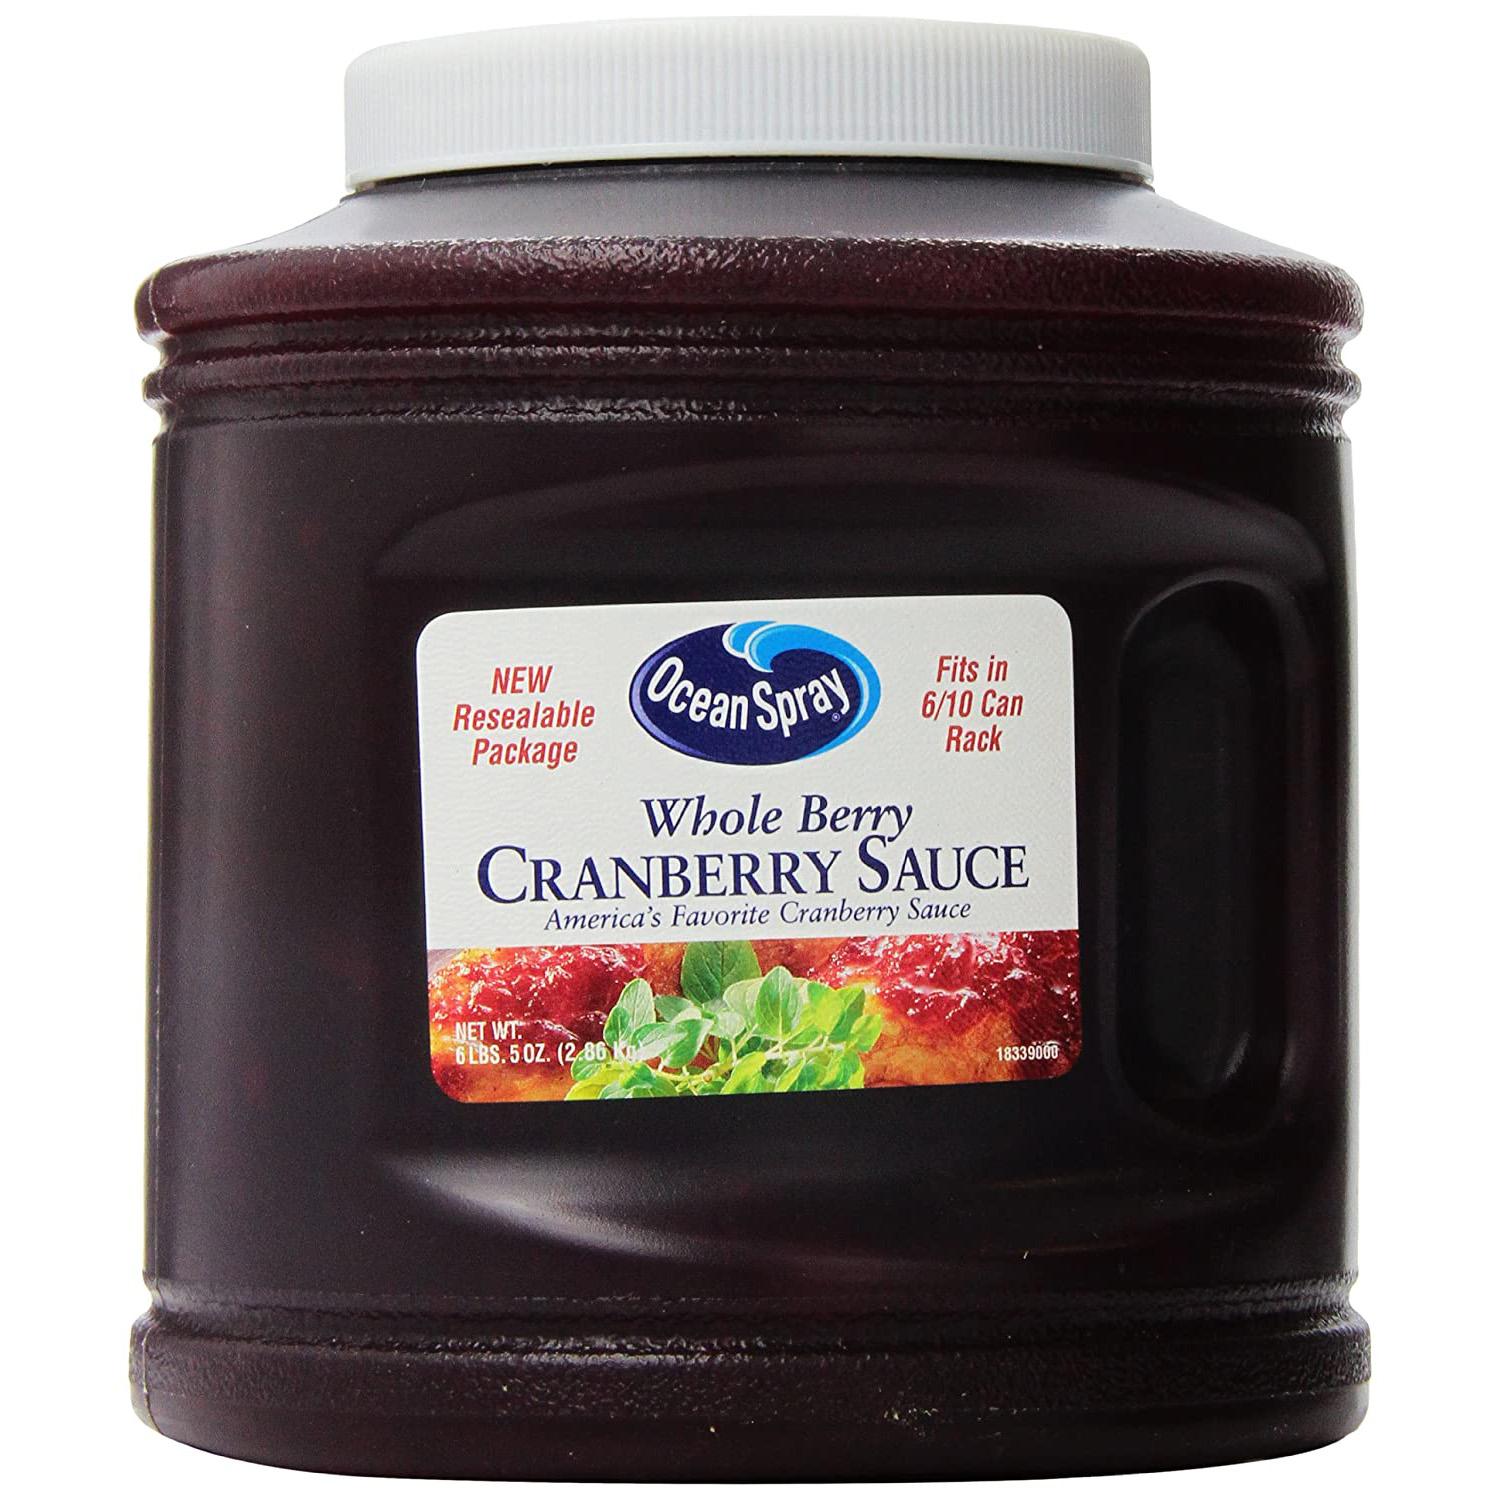 Ocean Spray Whole Cranberry Sauce for $3.64 Shipped